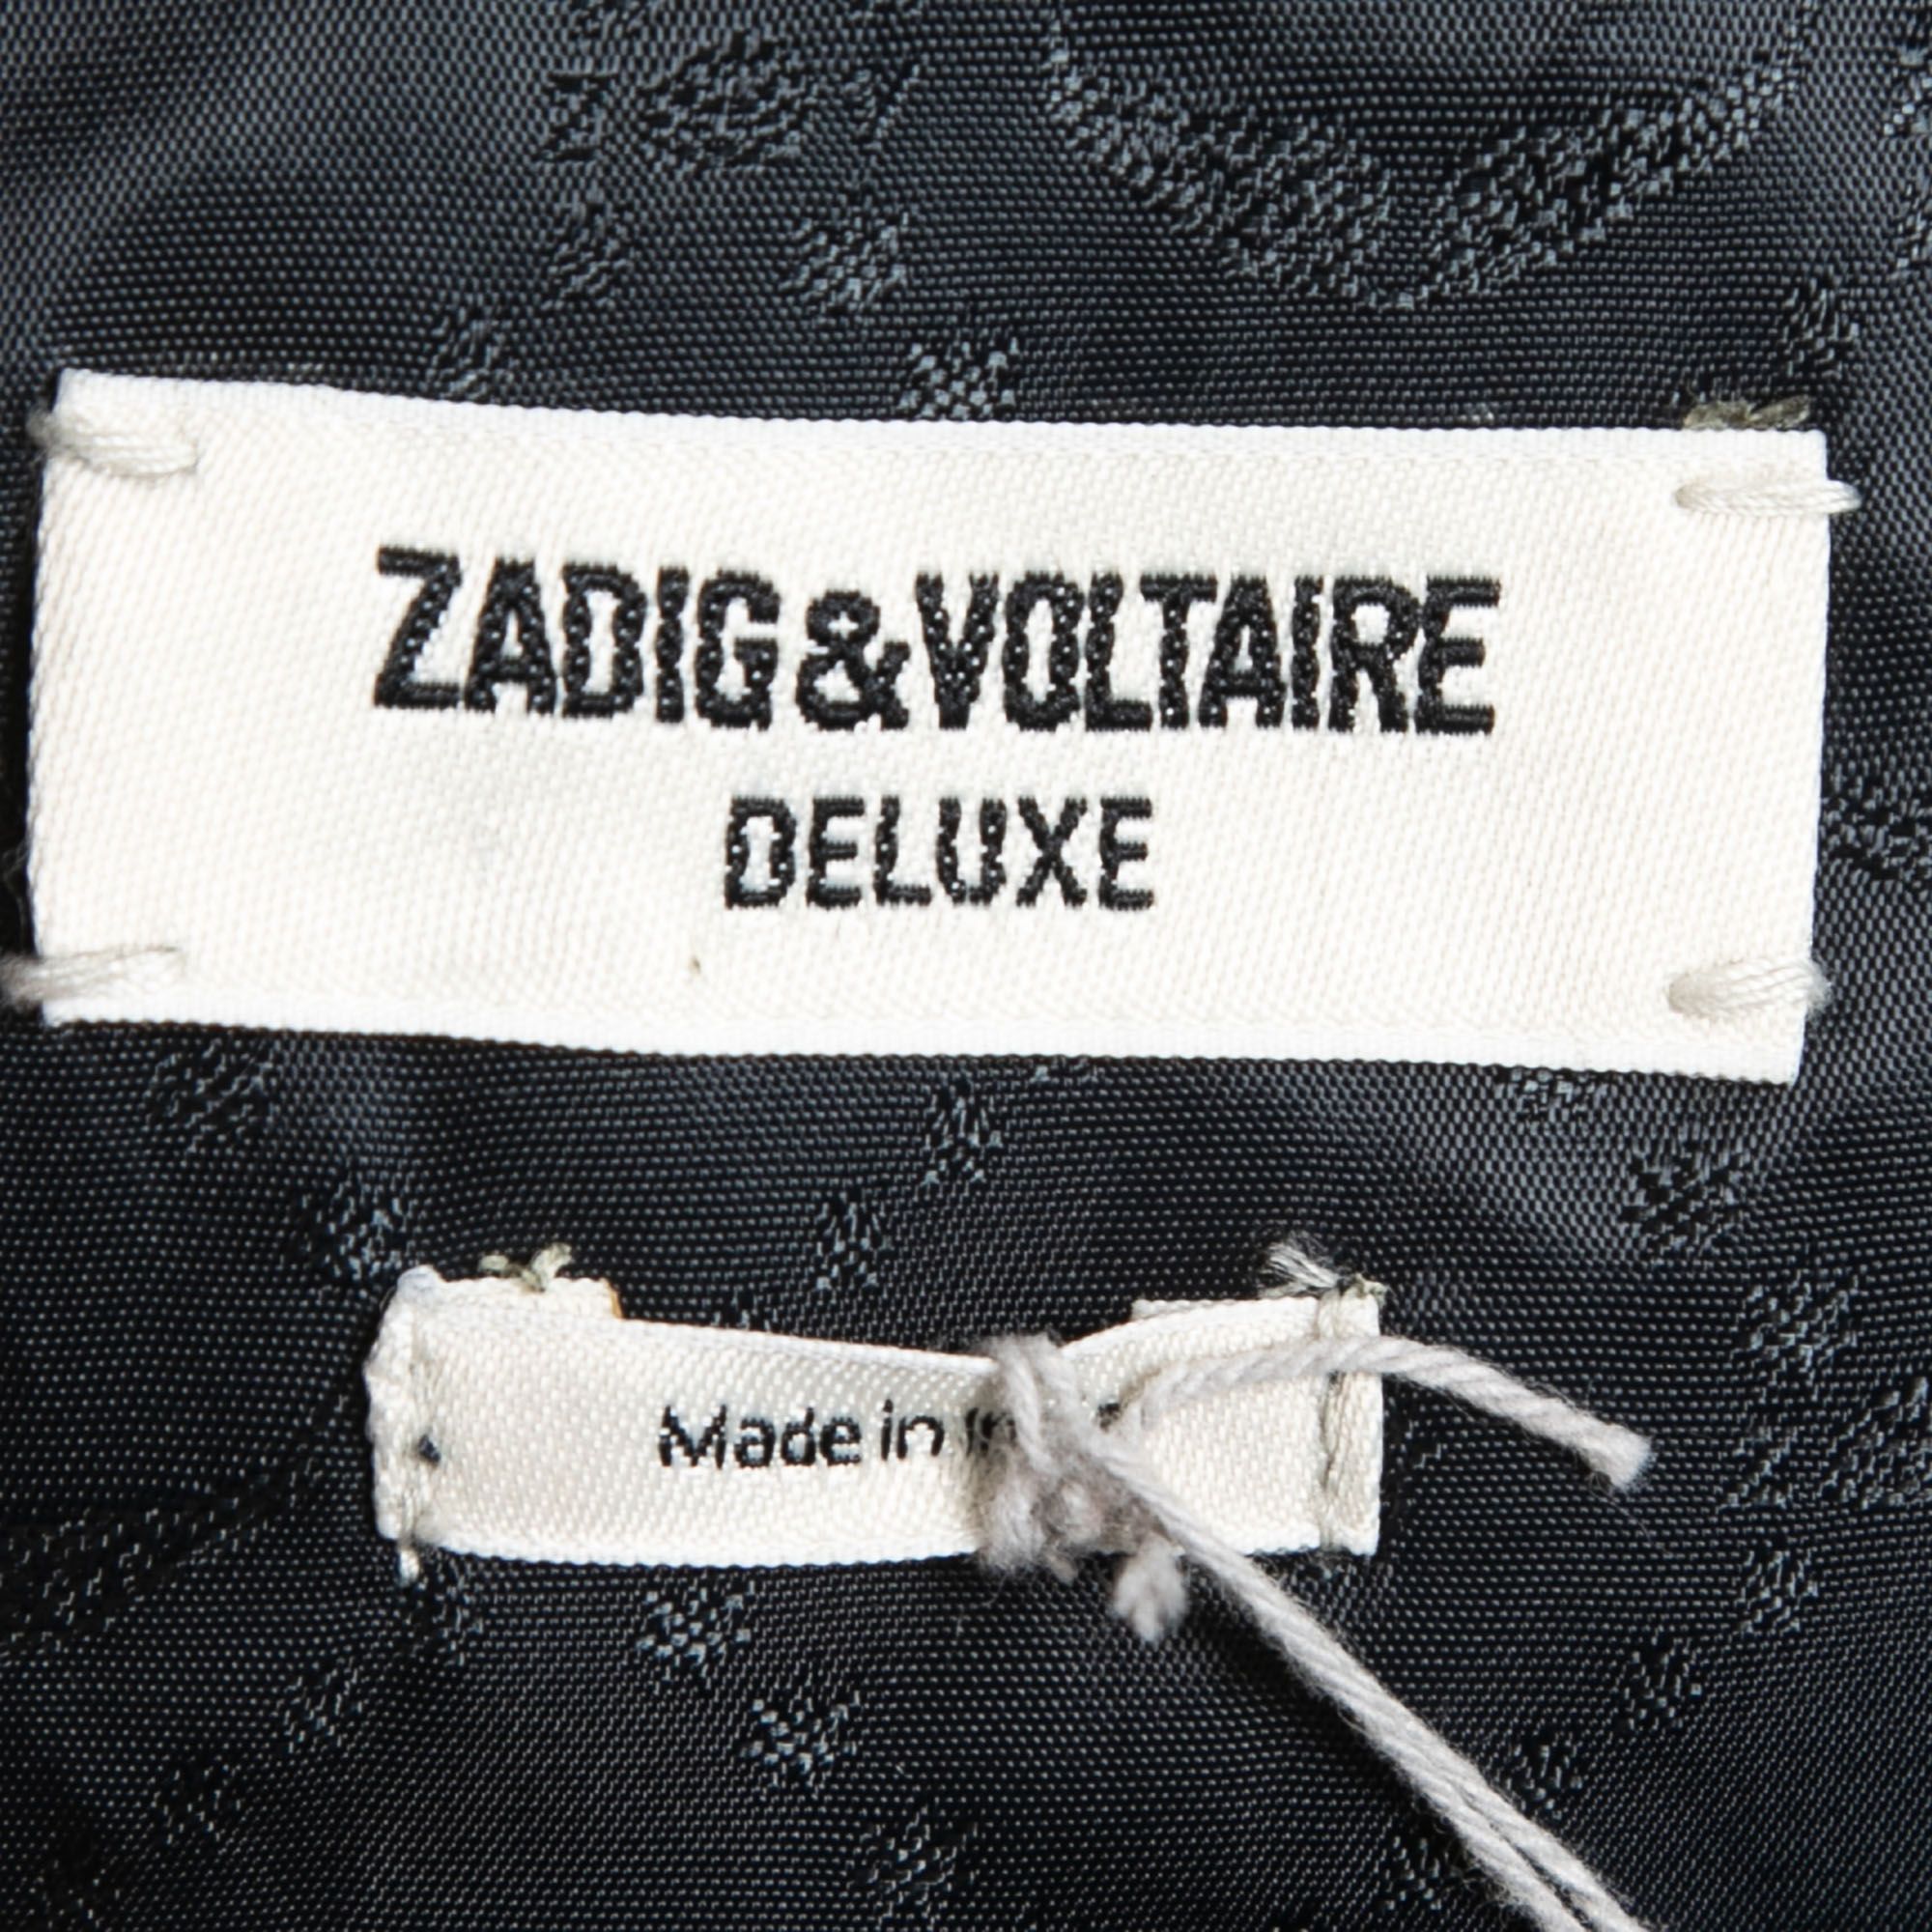 Zadig And Voltaire Black Fringed Leather Mini Skirt M